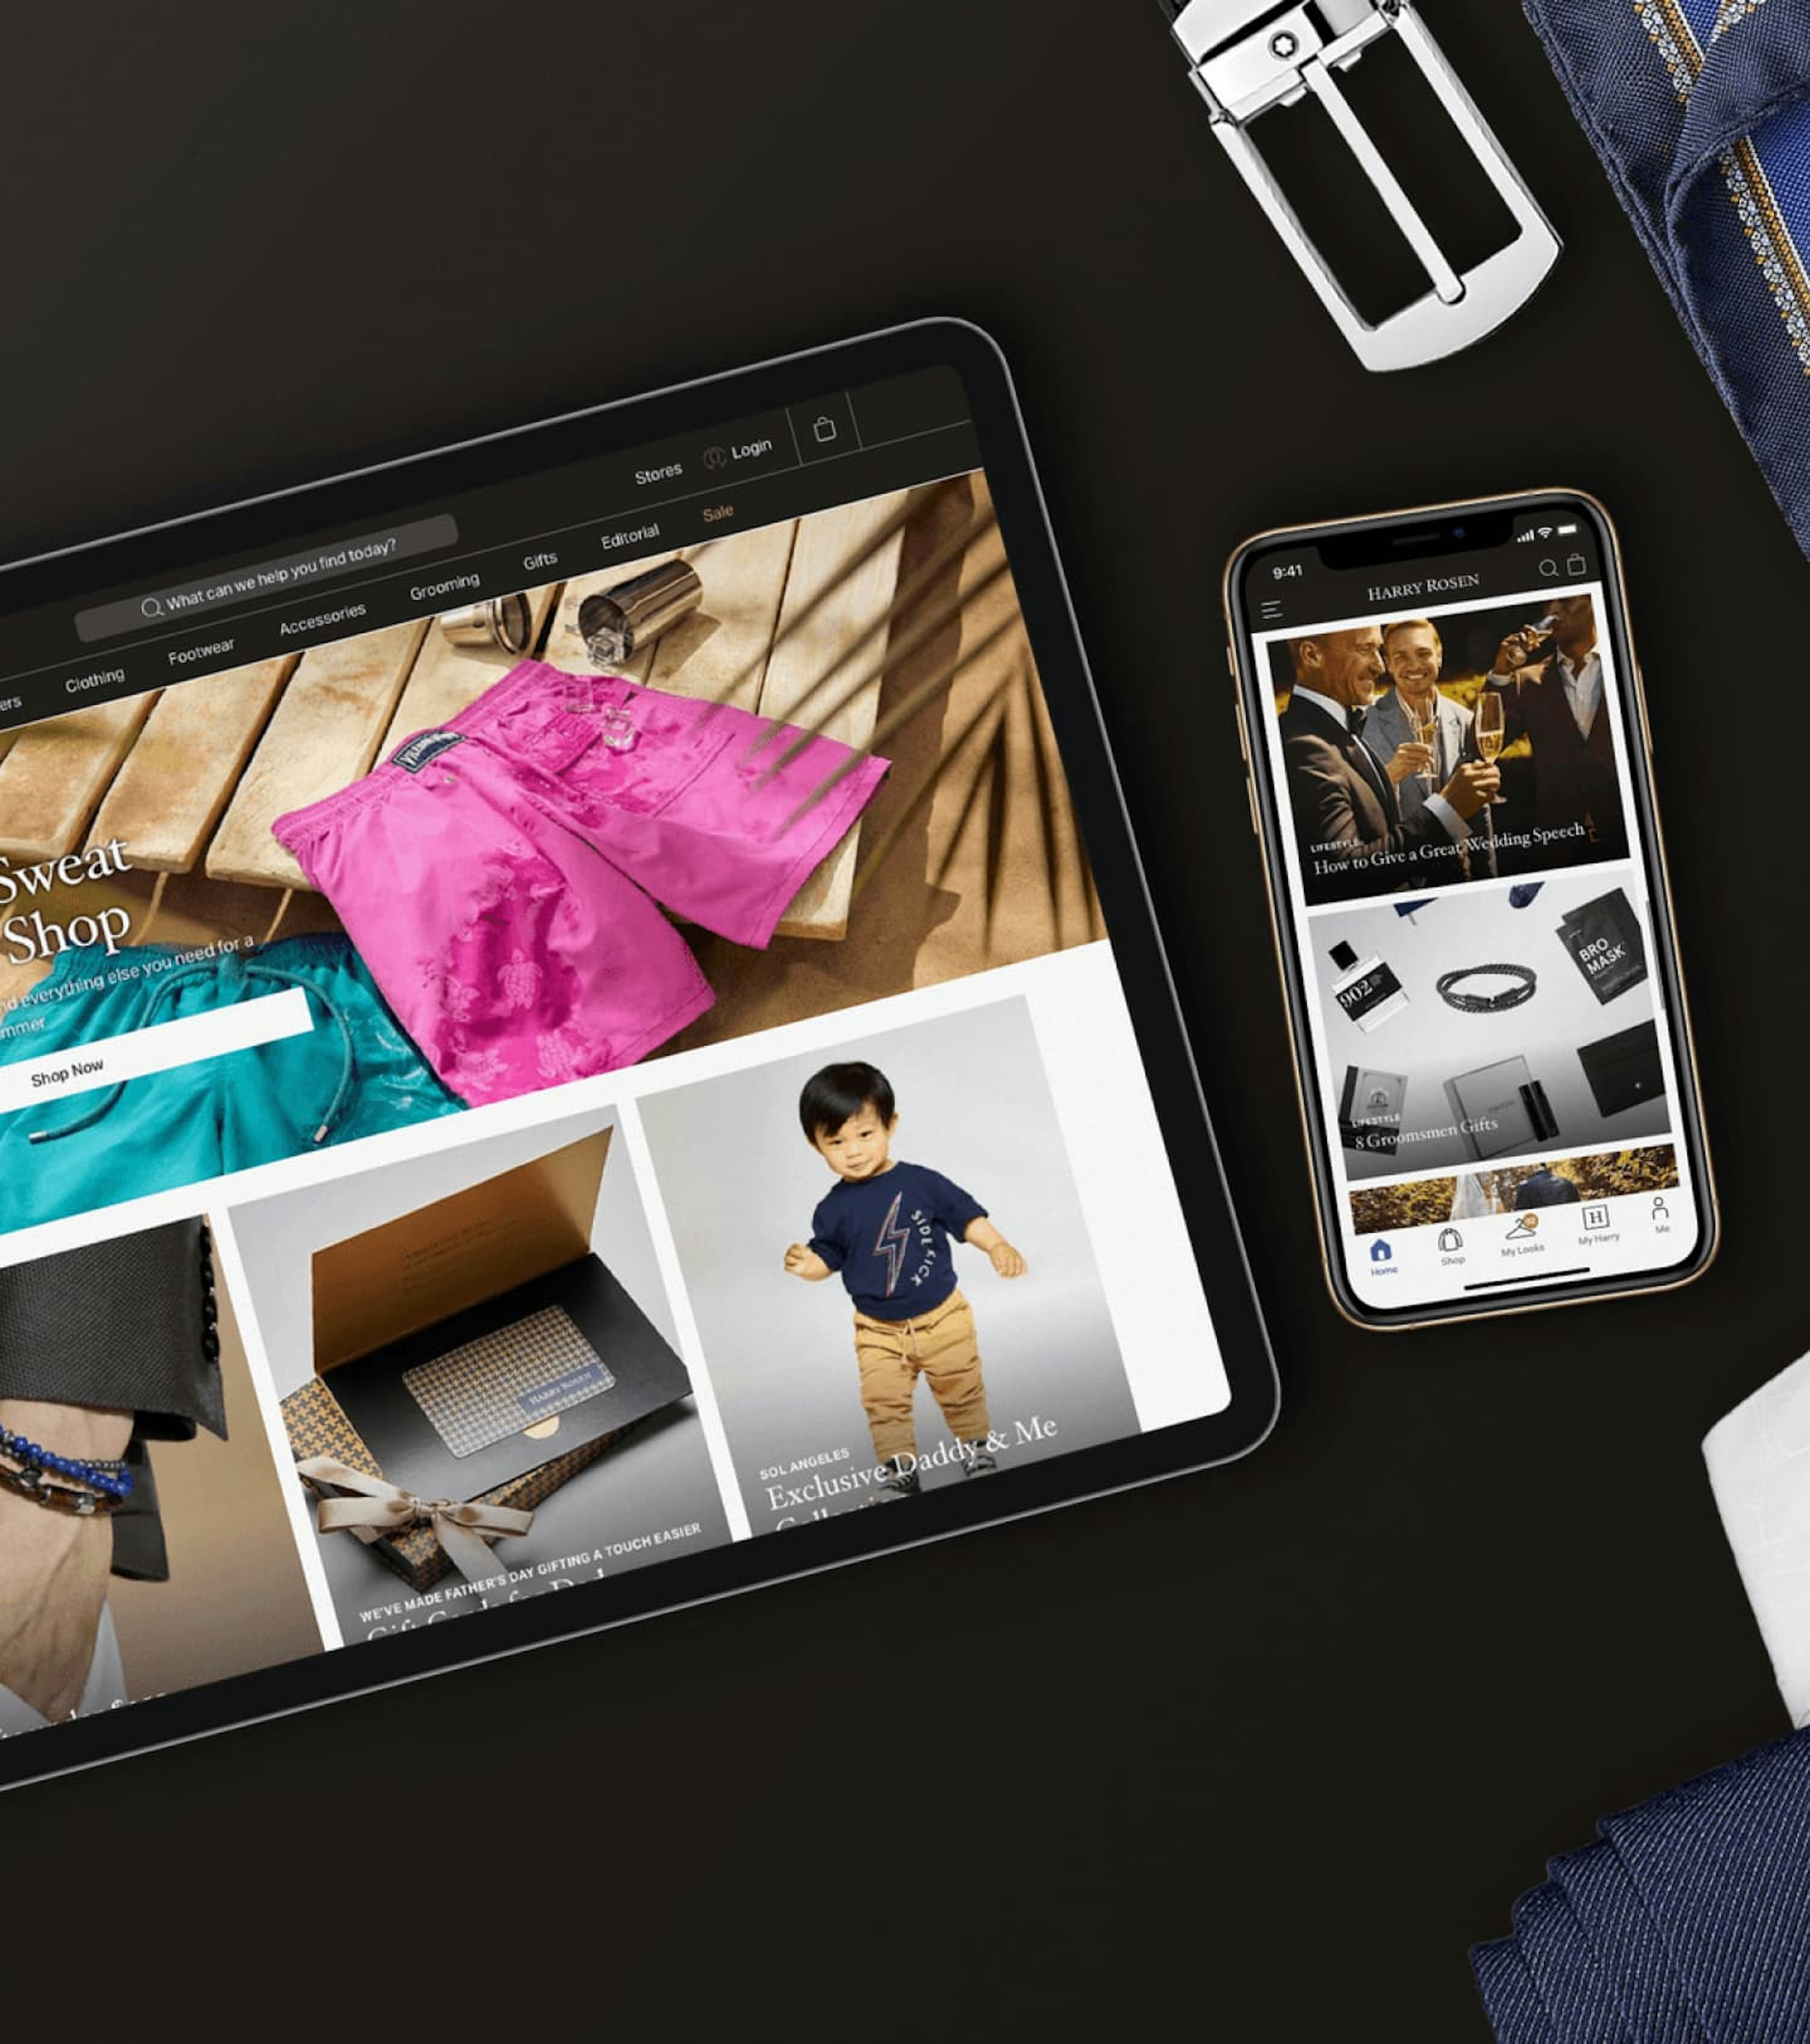 Flatlay of the Harry Rosen website on an iPad and iPhone with clothing and accessories around the devices.